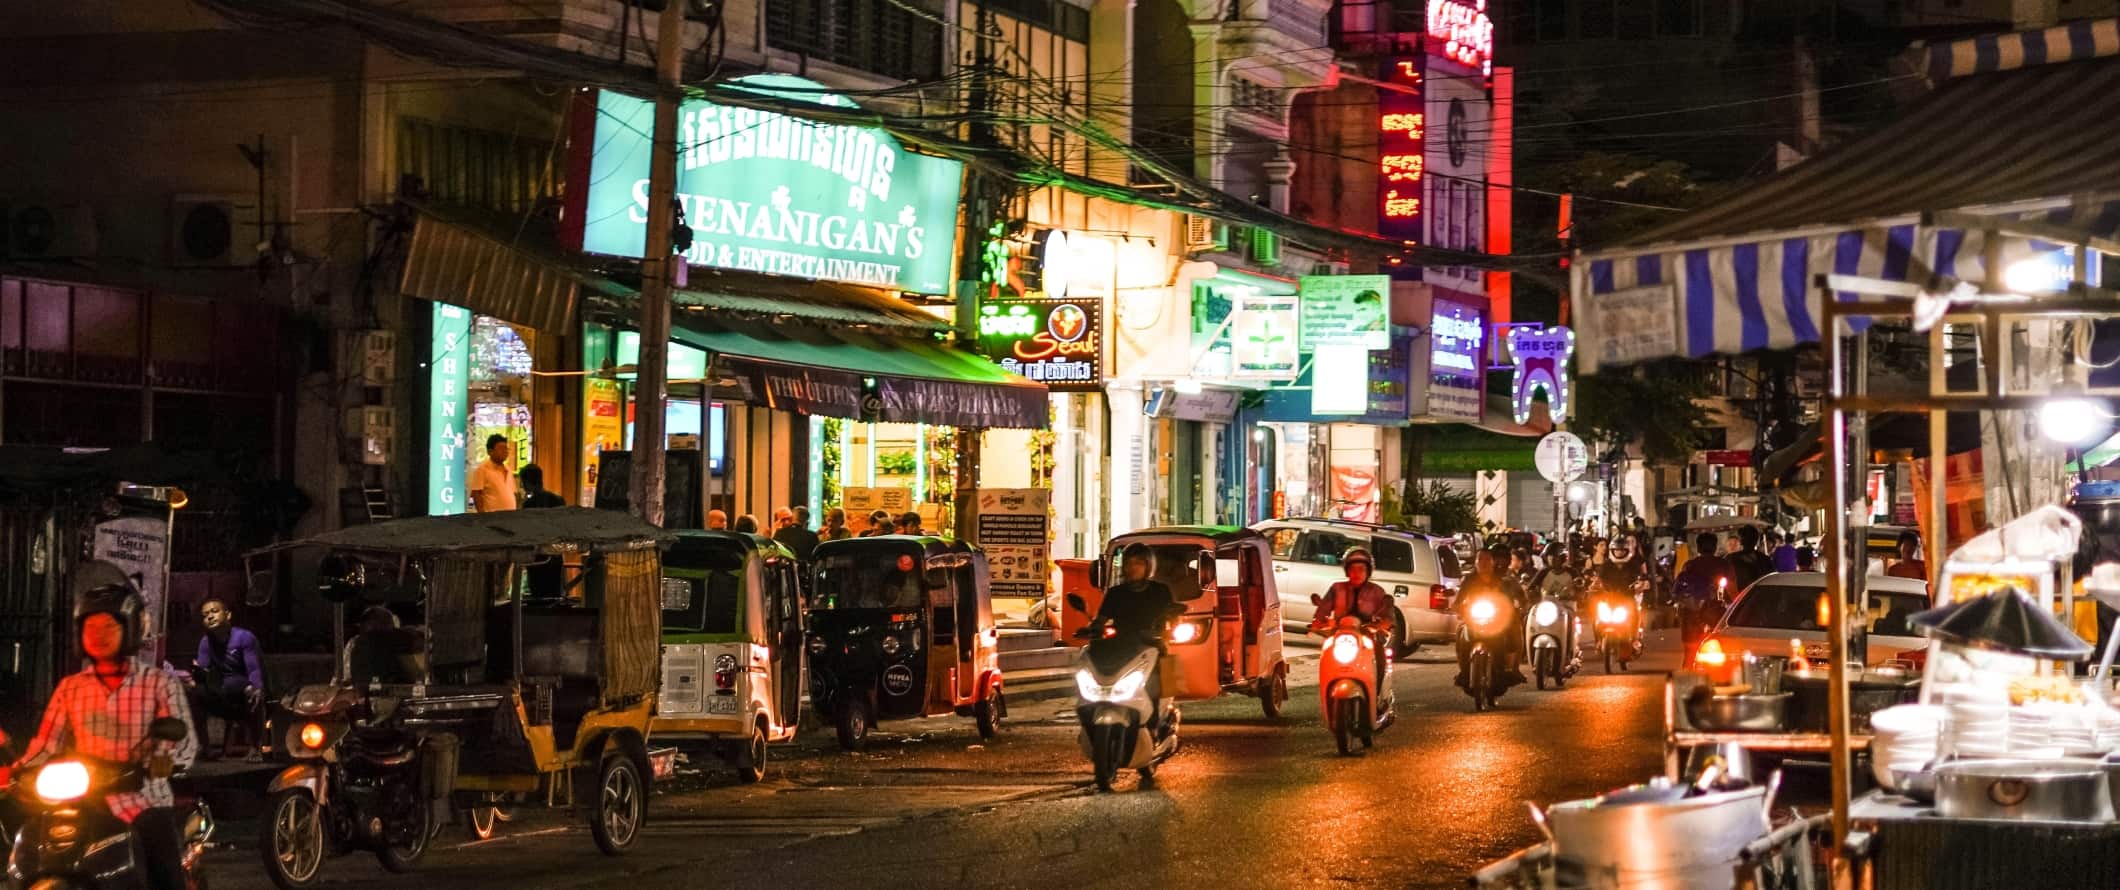 Mopeds, motorbikes, and tuk tuks driving along a street lit up at night in Phnom Penh, the capital city of Cambodia